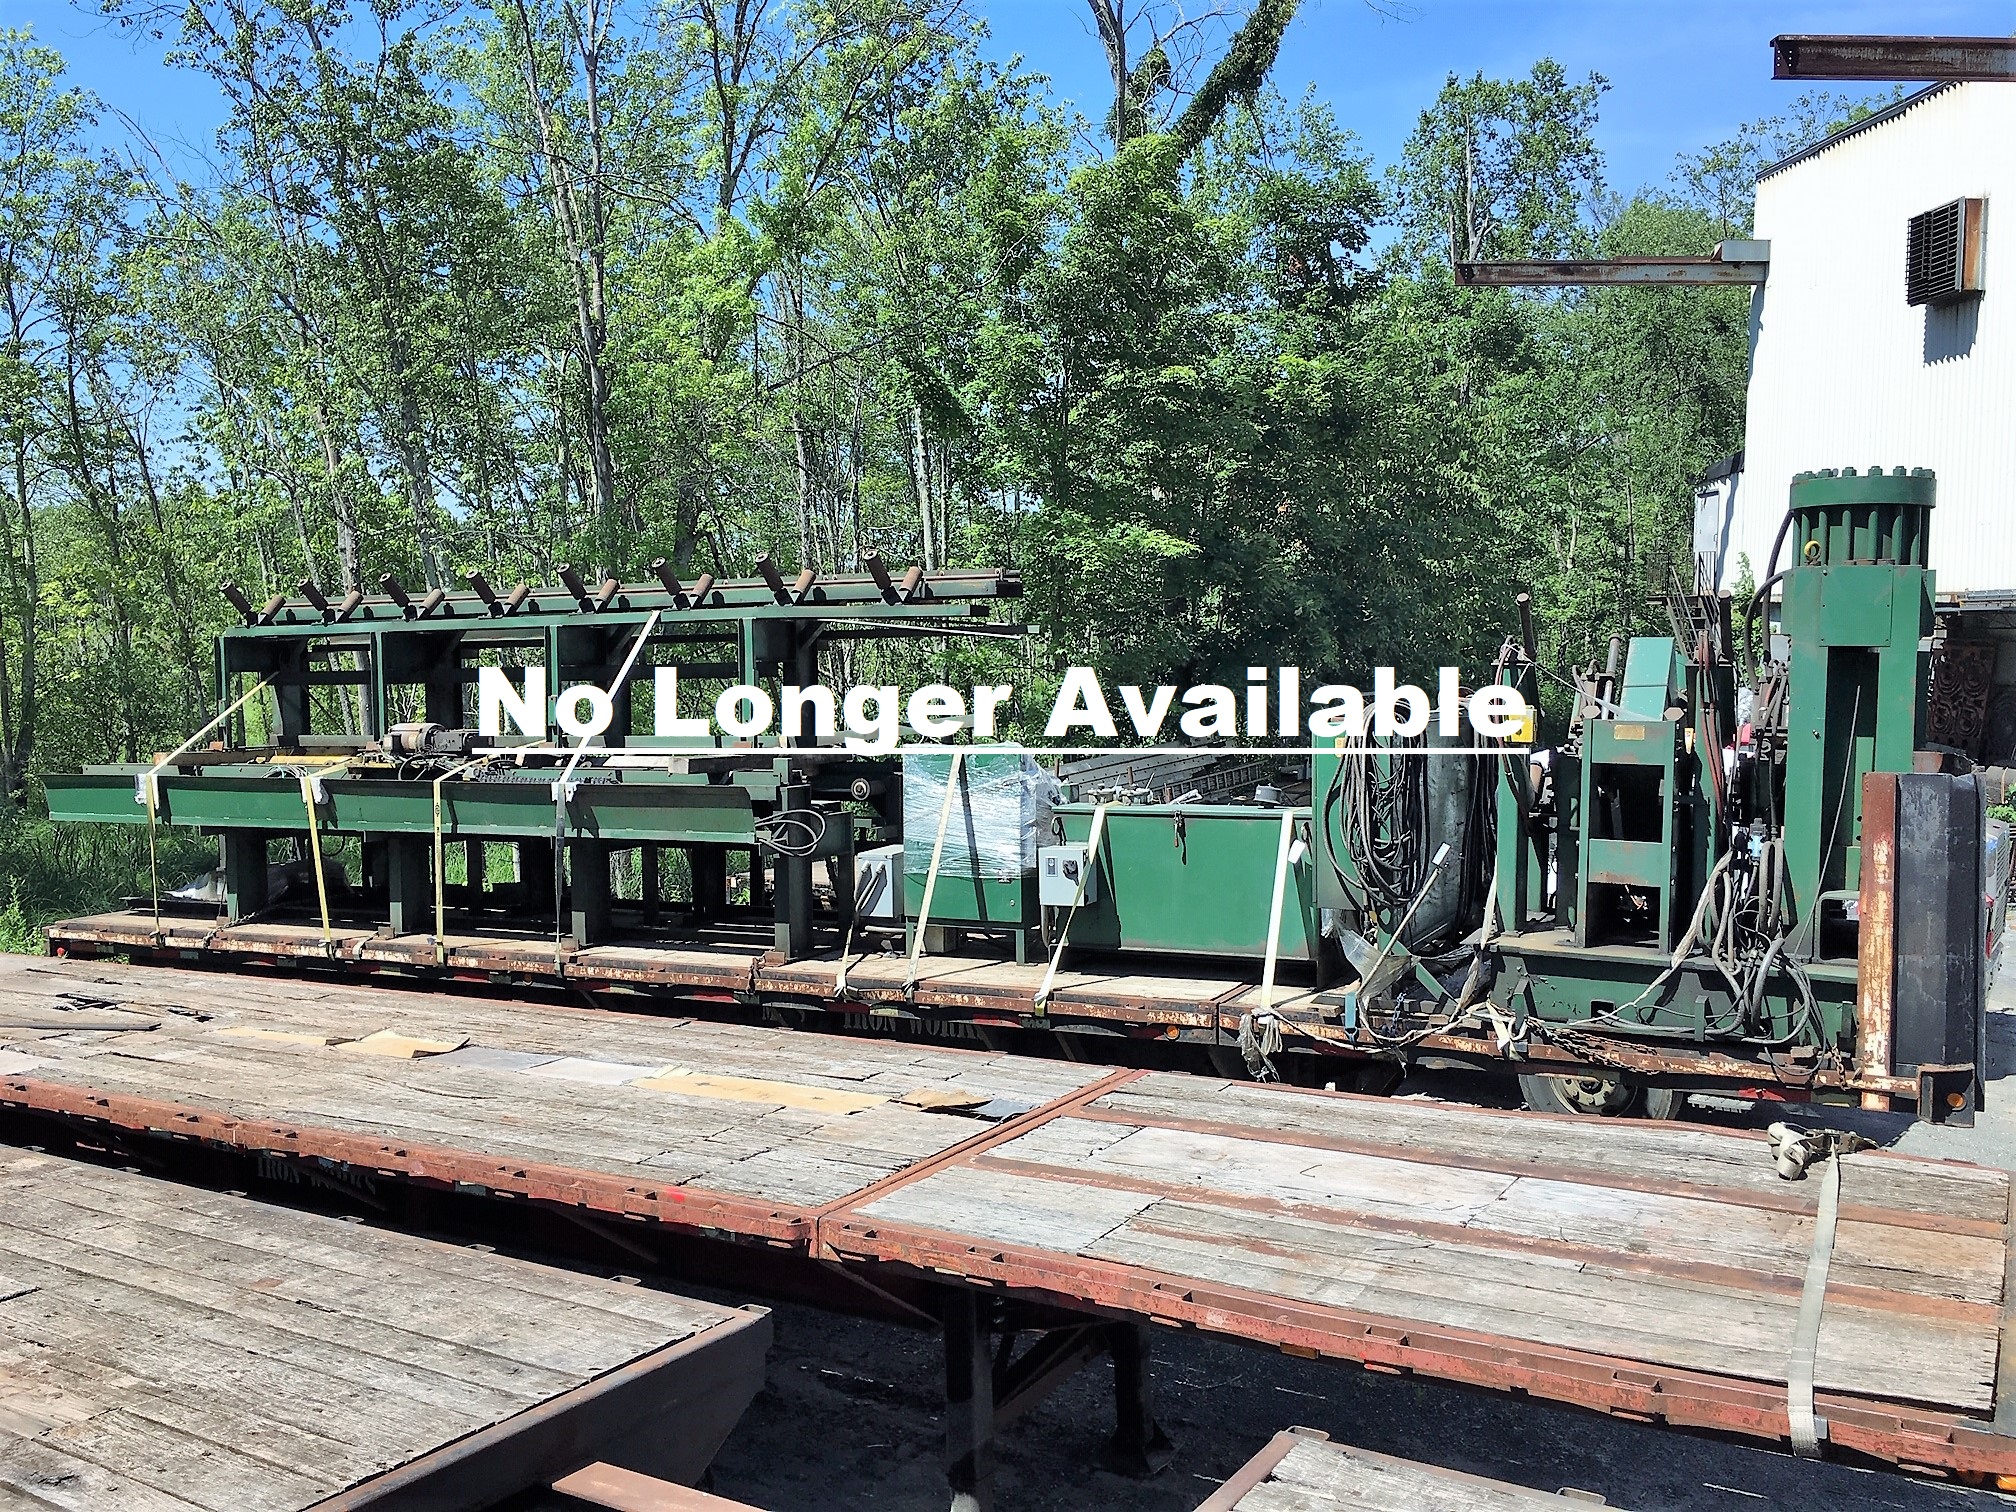 Angle Line flat bar punch and shear machine. Controlled Automation model ABL 100 Single shear punch. 100 - 110 ton punch capacity.  BAS 425 ton single cuts. 8" x 8" x 3/4" max angle bar and 12" x 1" max flat plate bar size. 40'end feed conveyor, pump and control board. Early 1990's model set up. Computer needs updating. offering as complete single shear and punch machine set up. Open to selling components separately.